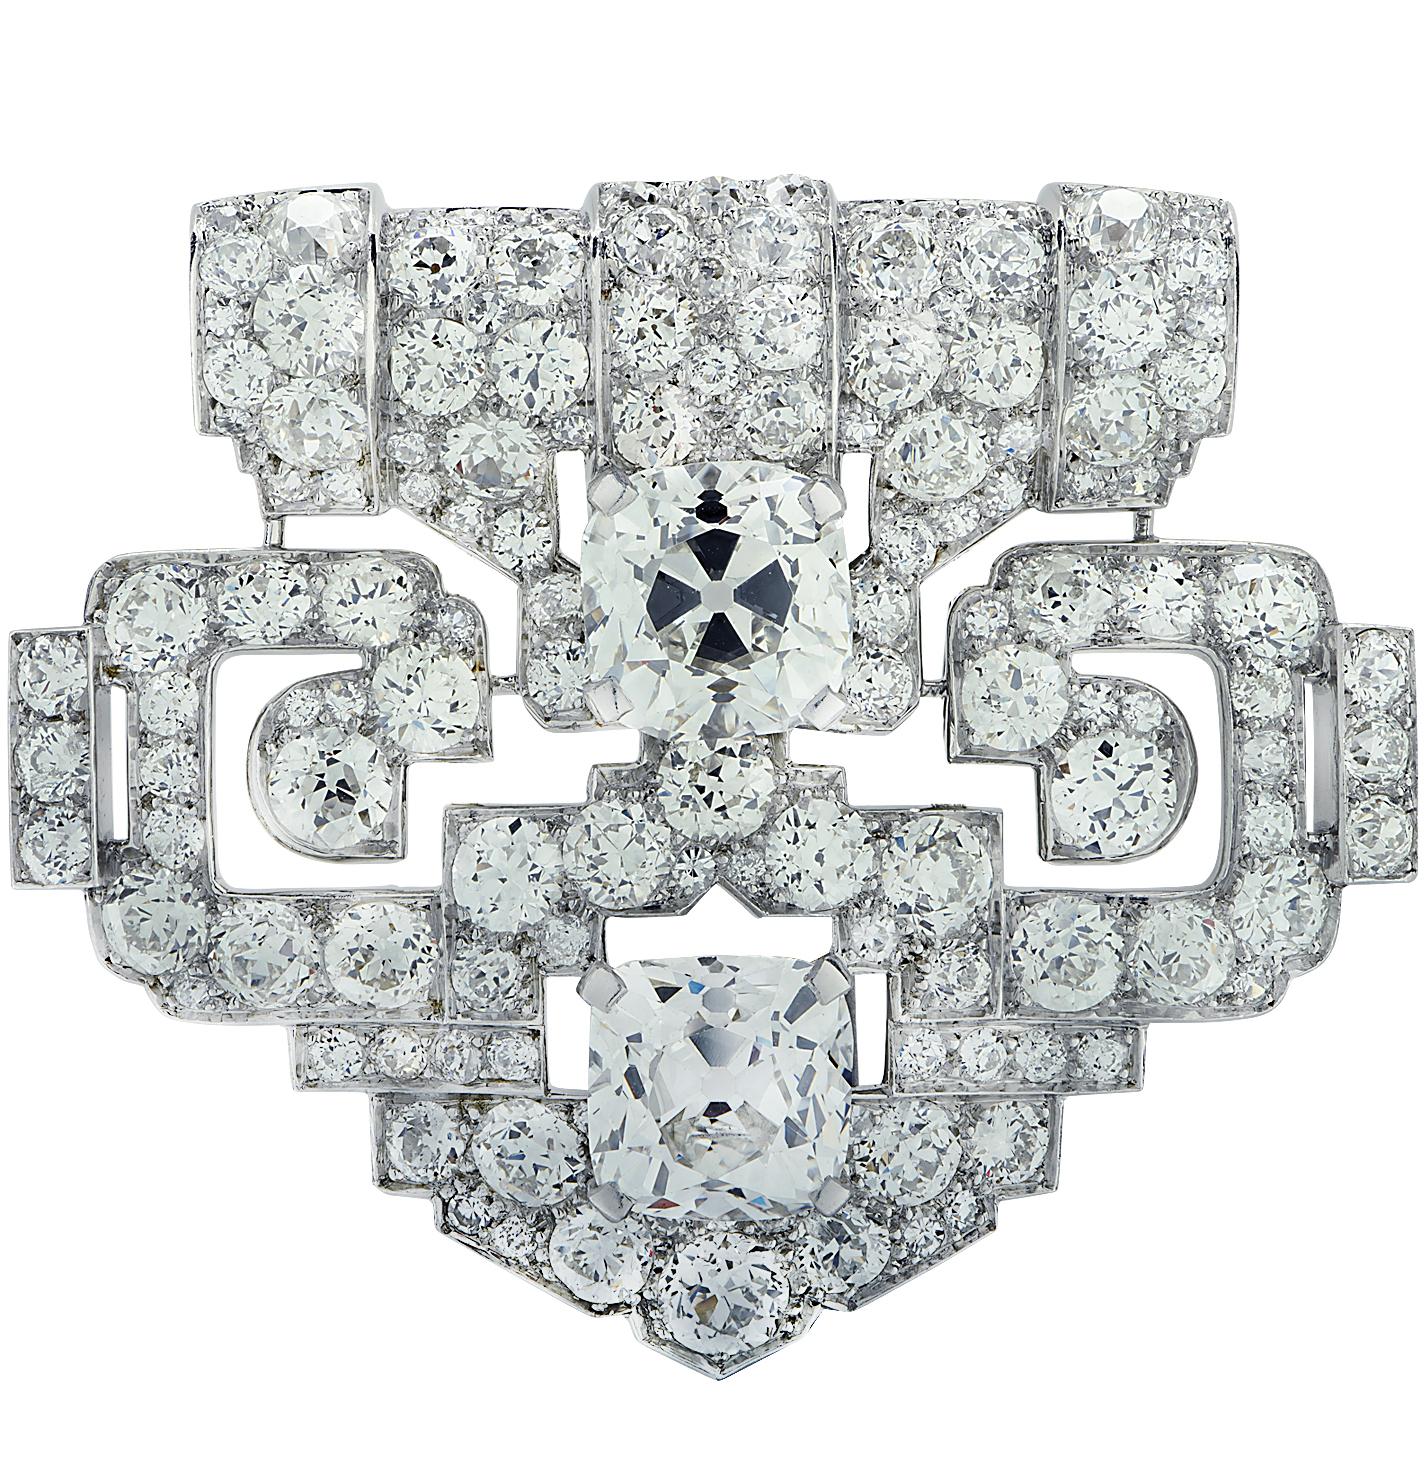 Cartier New York GIA Certified 11.24 Carat Old Mine Cushion Diamond Brooch For Sale 2